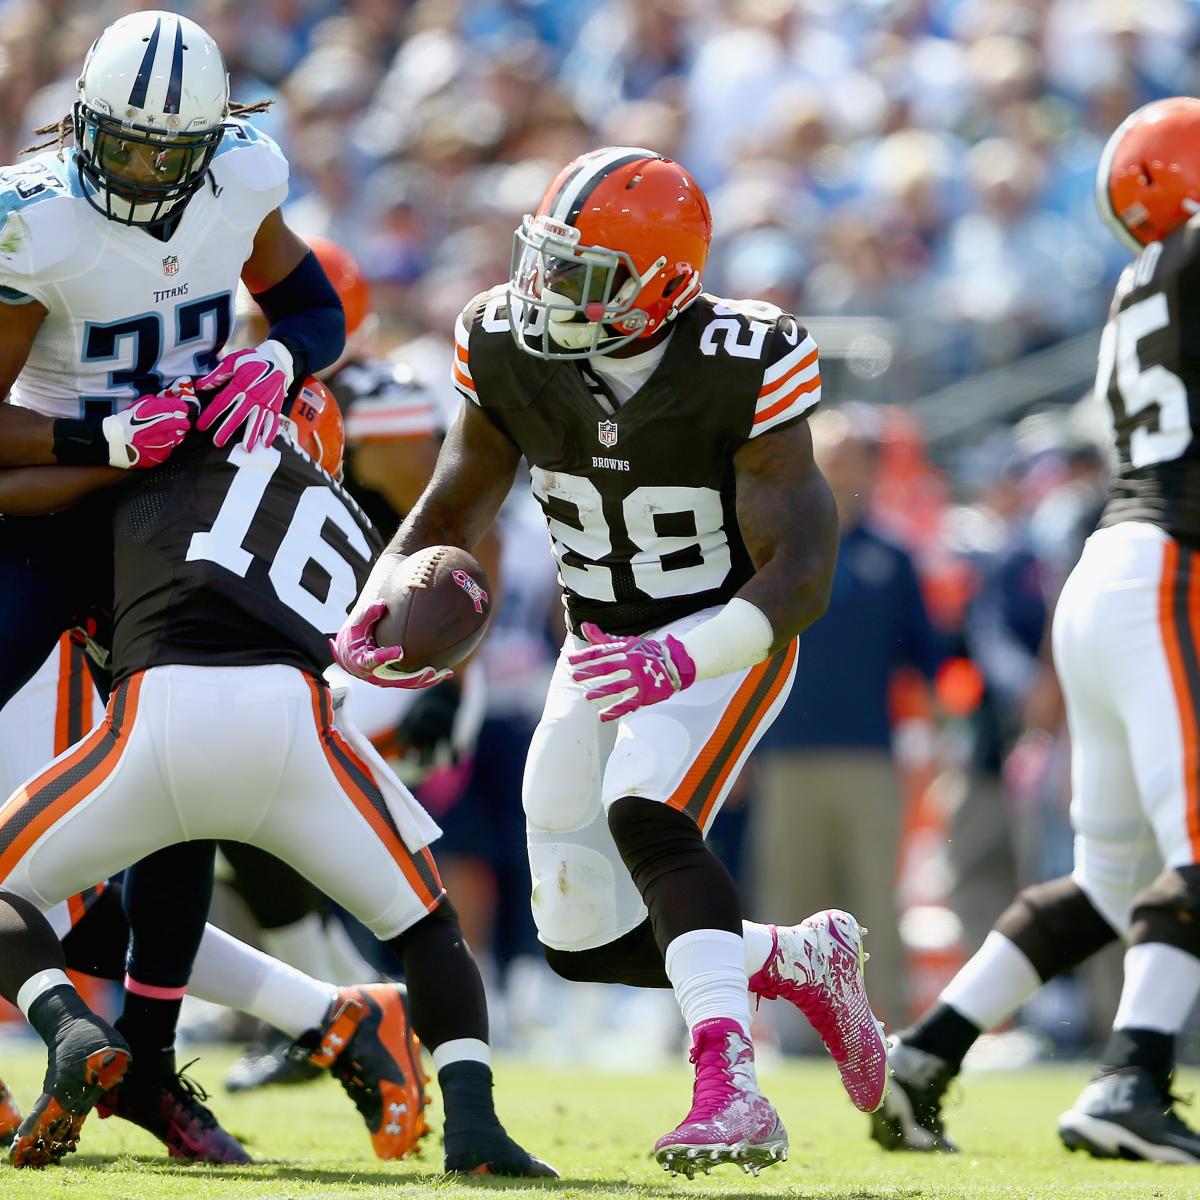 Cleveland Browns vs. Tennessee Titans Video Highlights and Recap from